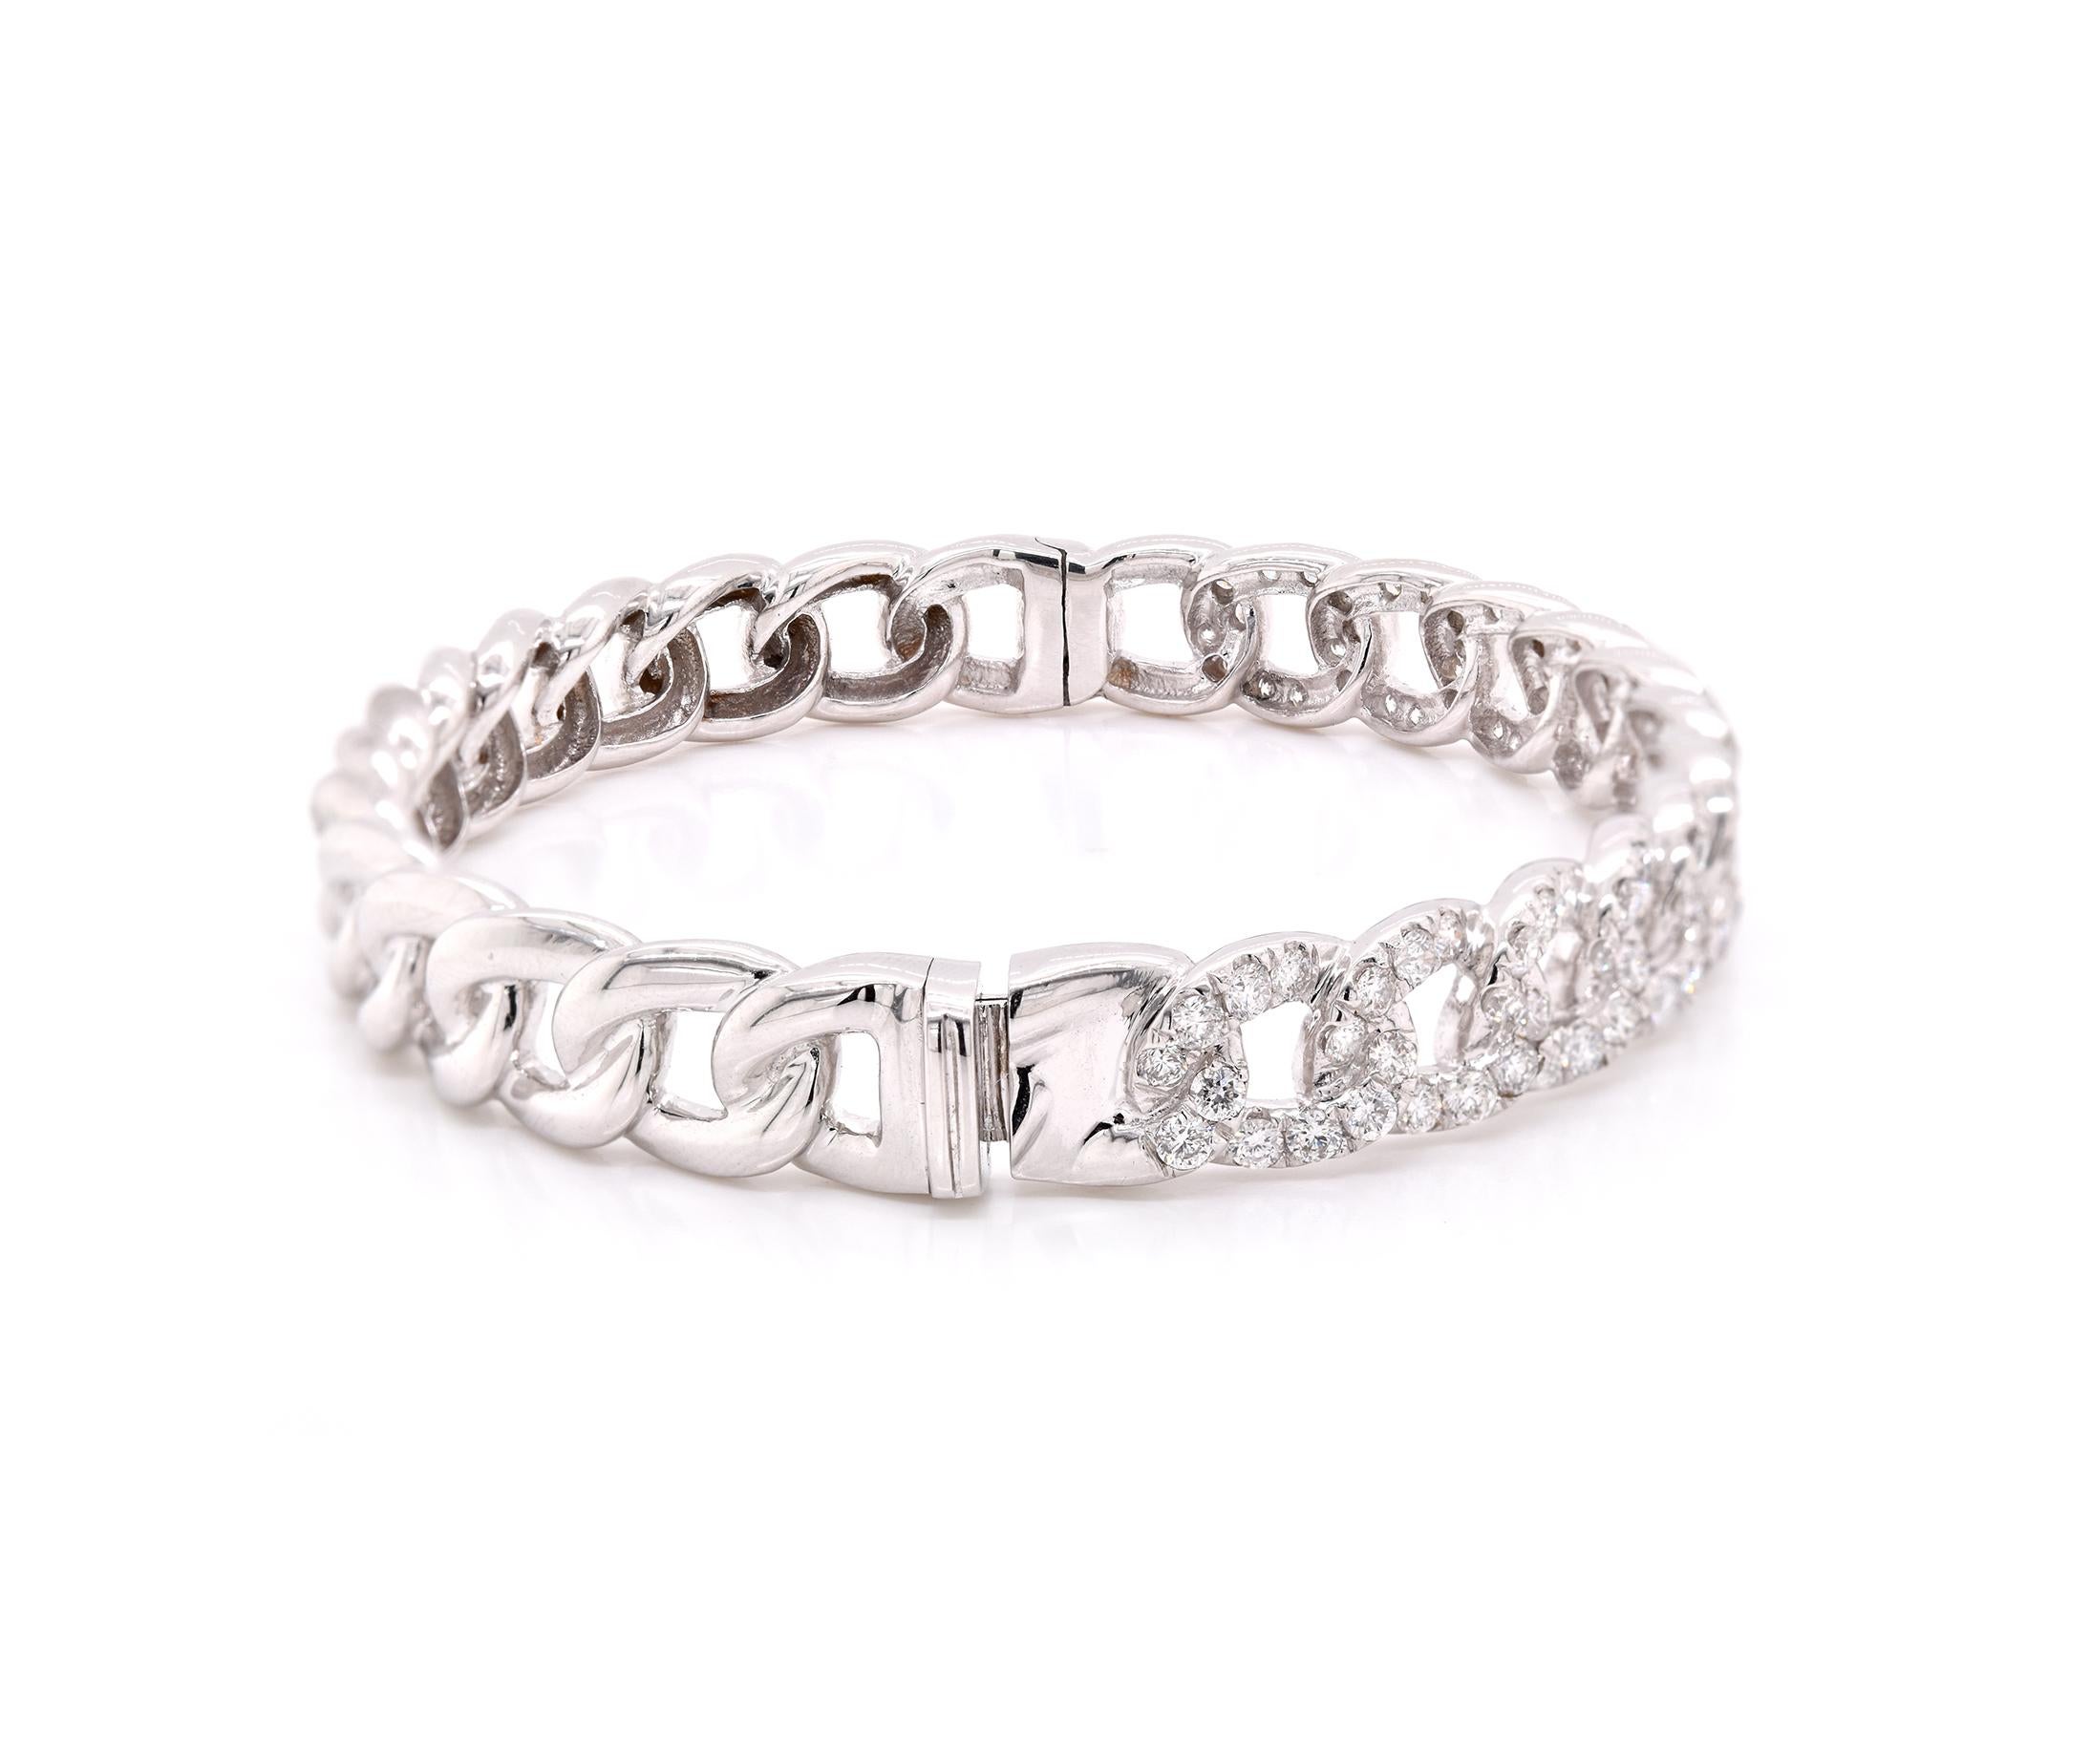 Material: 18K white gold
Diamonds:  100 round cut = 2.79cttw
Color: G
Clarity: VS
Dimensions: bracelet will fit up to a 6.5-inch wrist 
Weight: 27.96 grams
